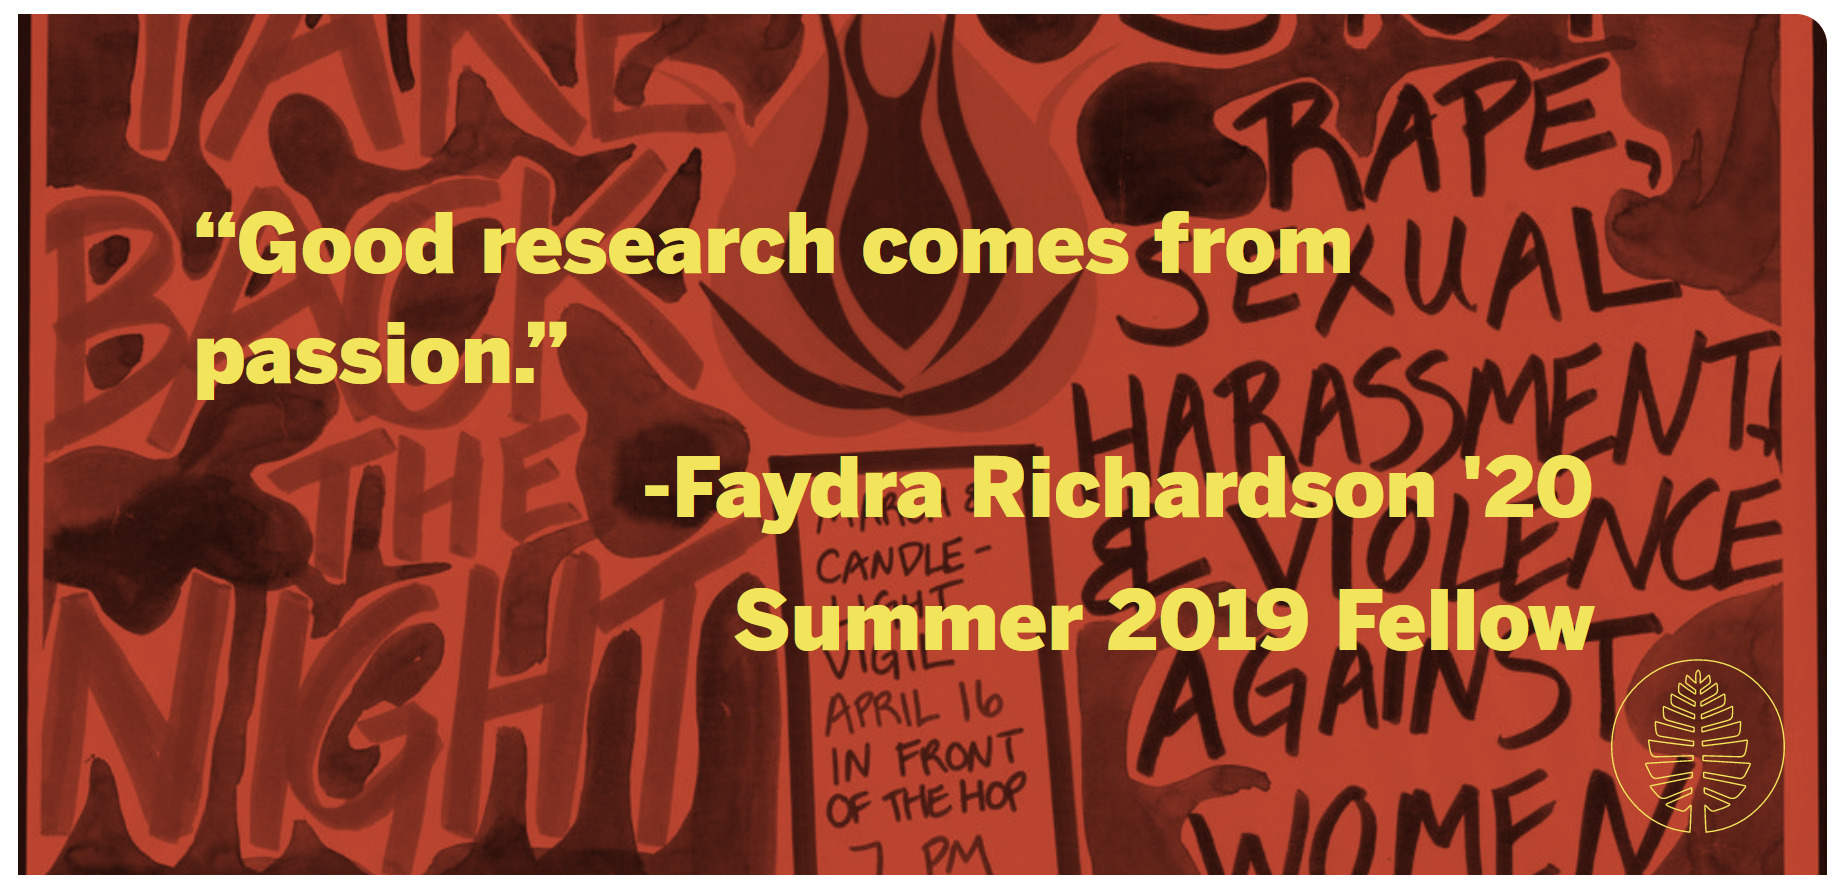 A quote against a background photo of a flyer advertising the Take Back the Night march. "Good research comes from passion." -Faydra Richardson '20, Summer 2019 Fellow